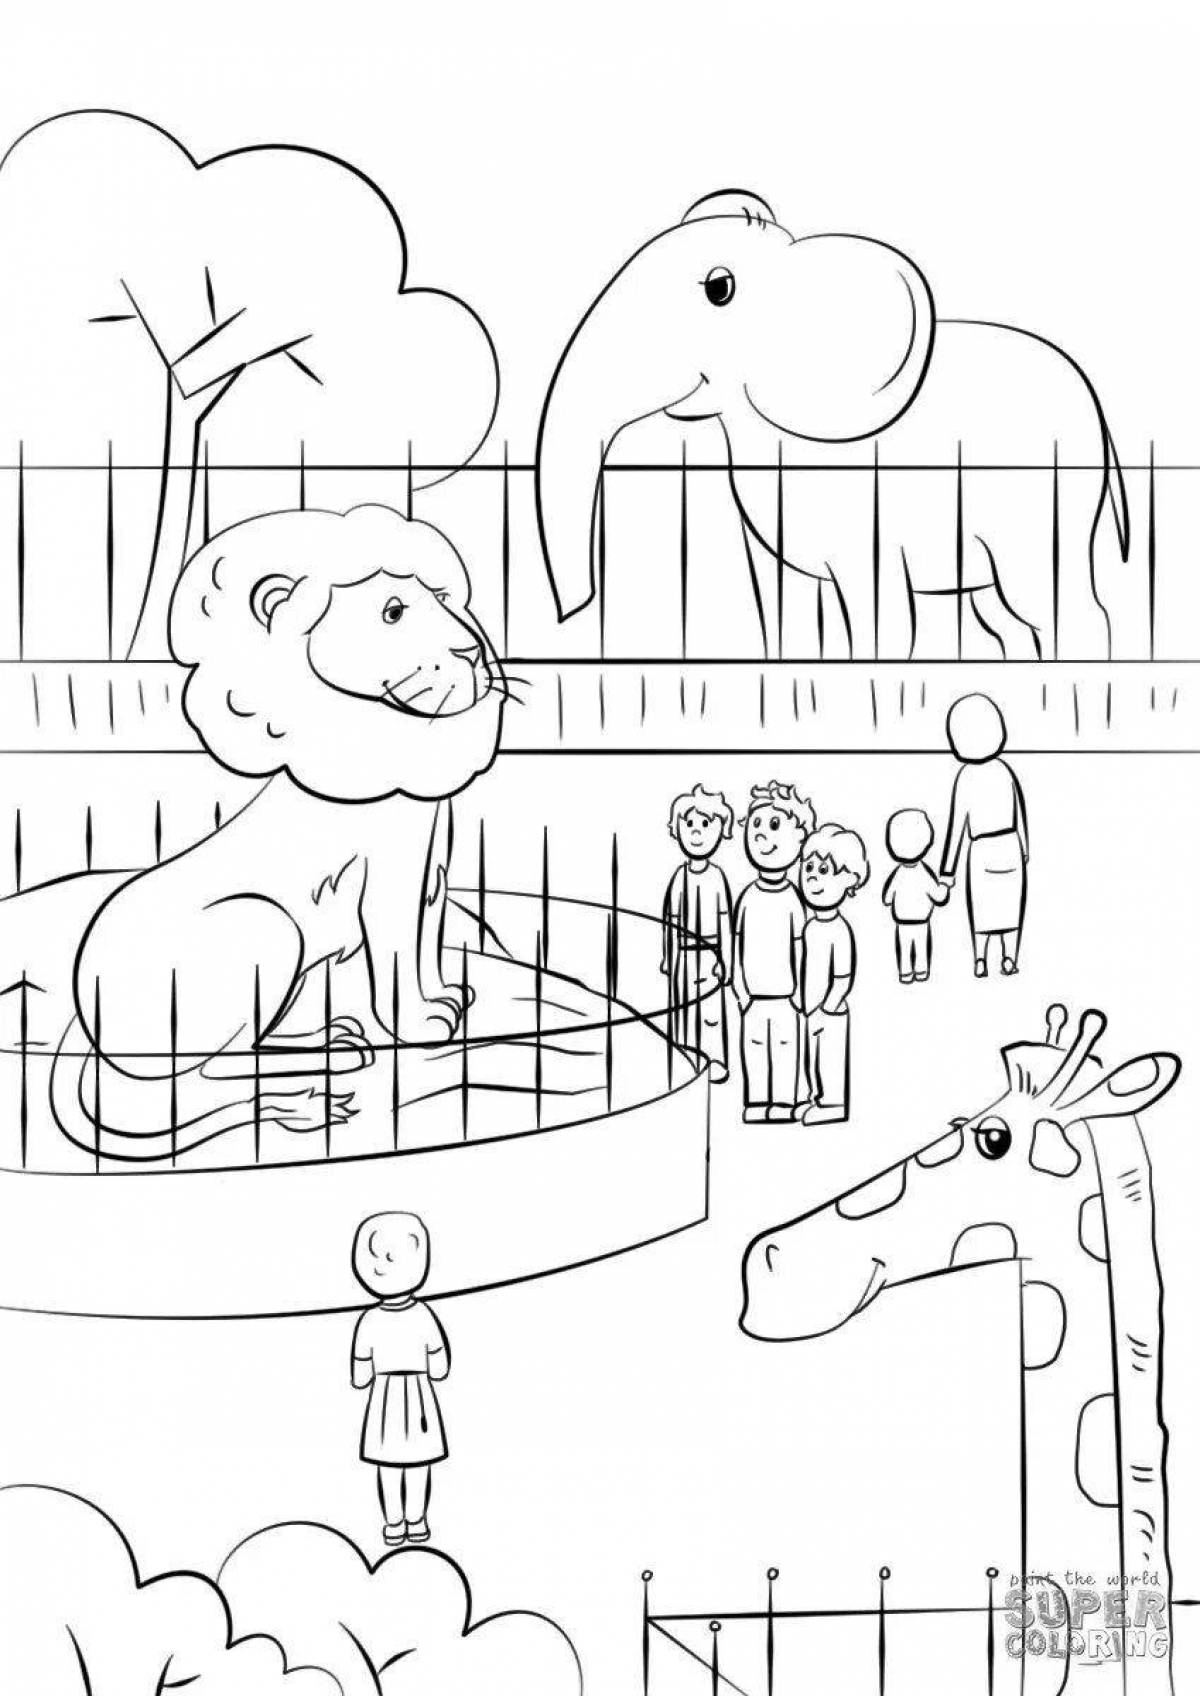 A fun zoo coloring book for kids